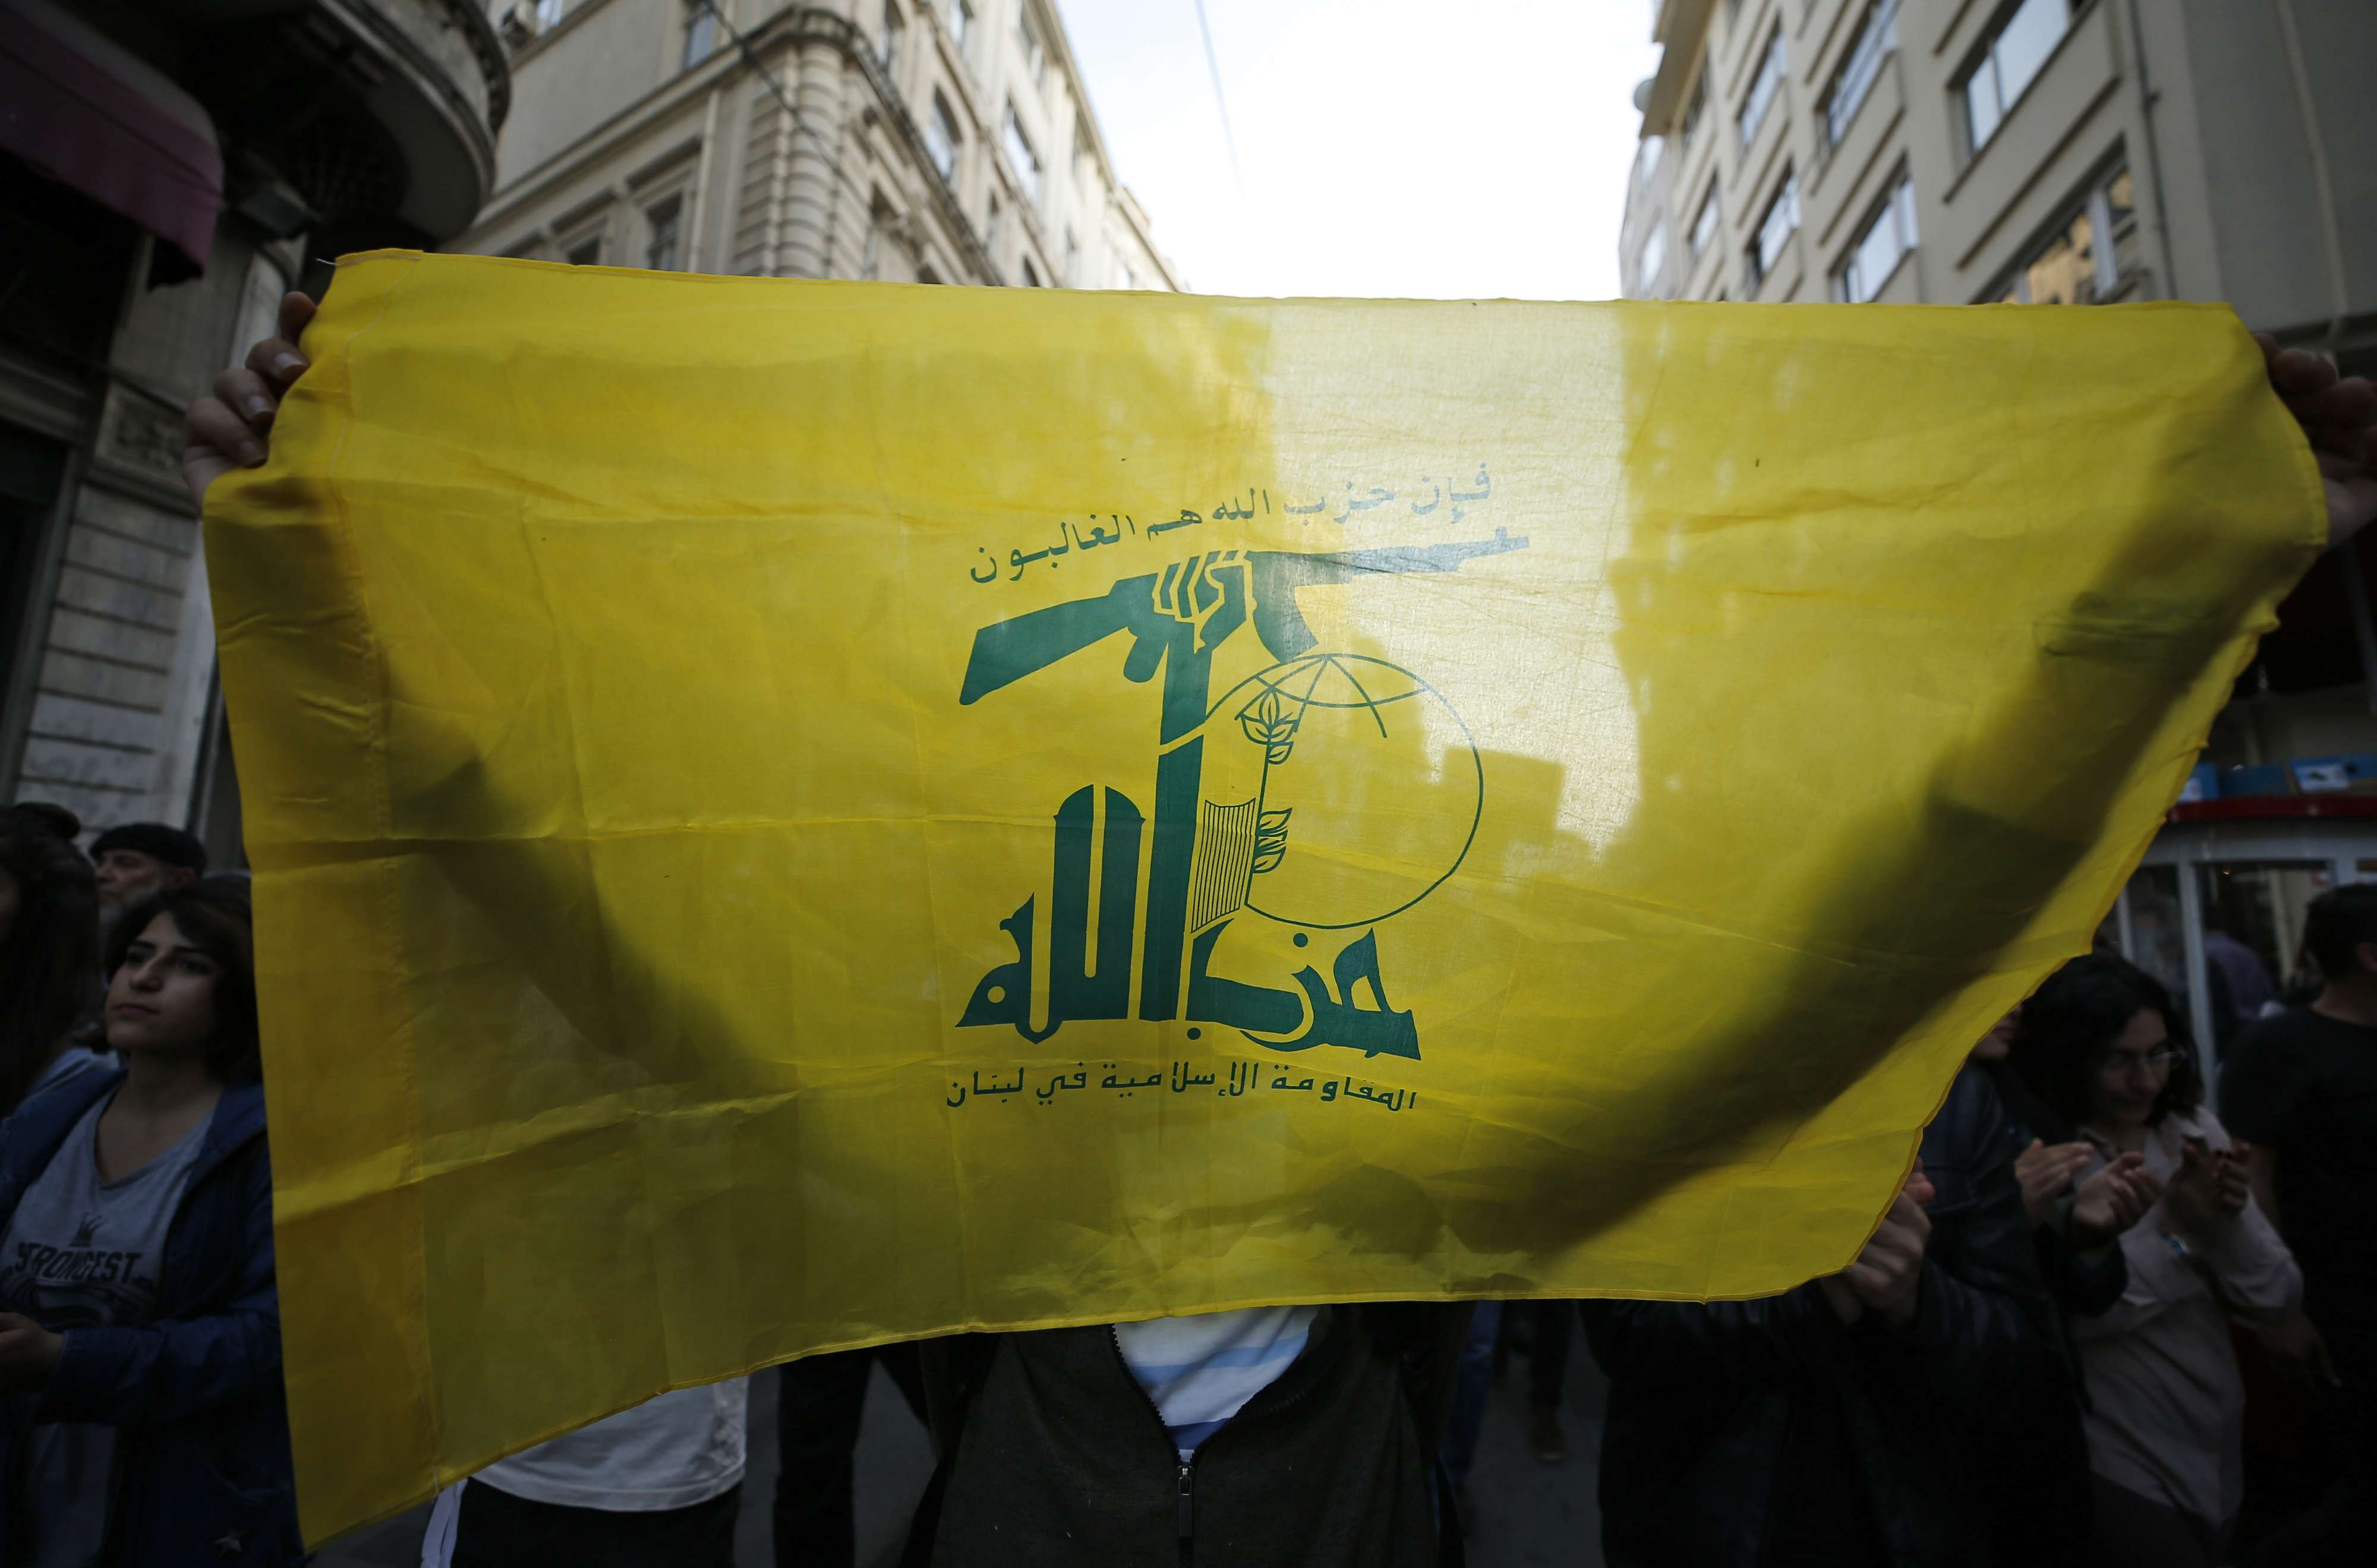 The move to list Hezbollah earned swift praise from the United States, Israel and Saudi Arabia.